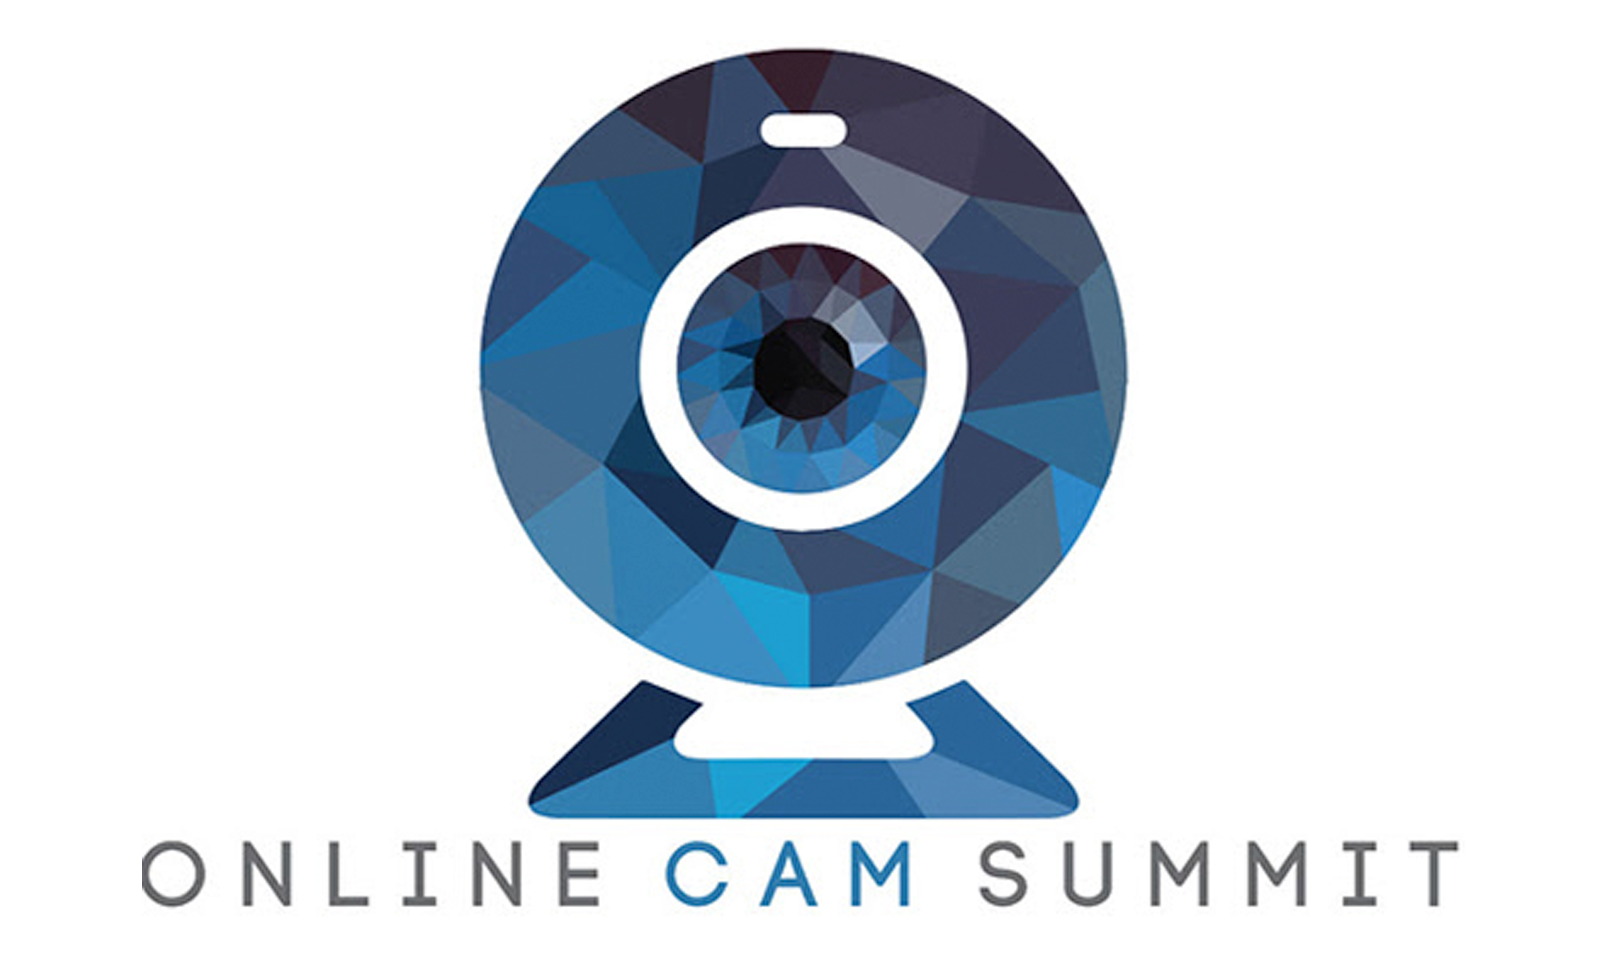 Online Cam Summit Returns May 20-23 for 3rd Edition